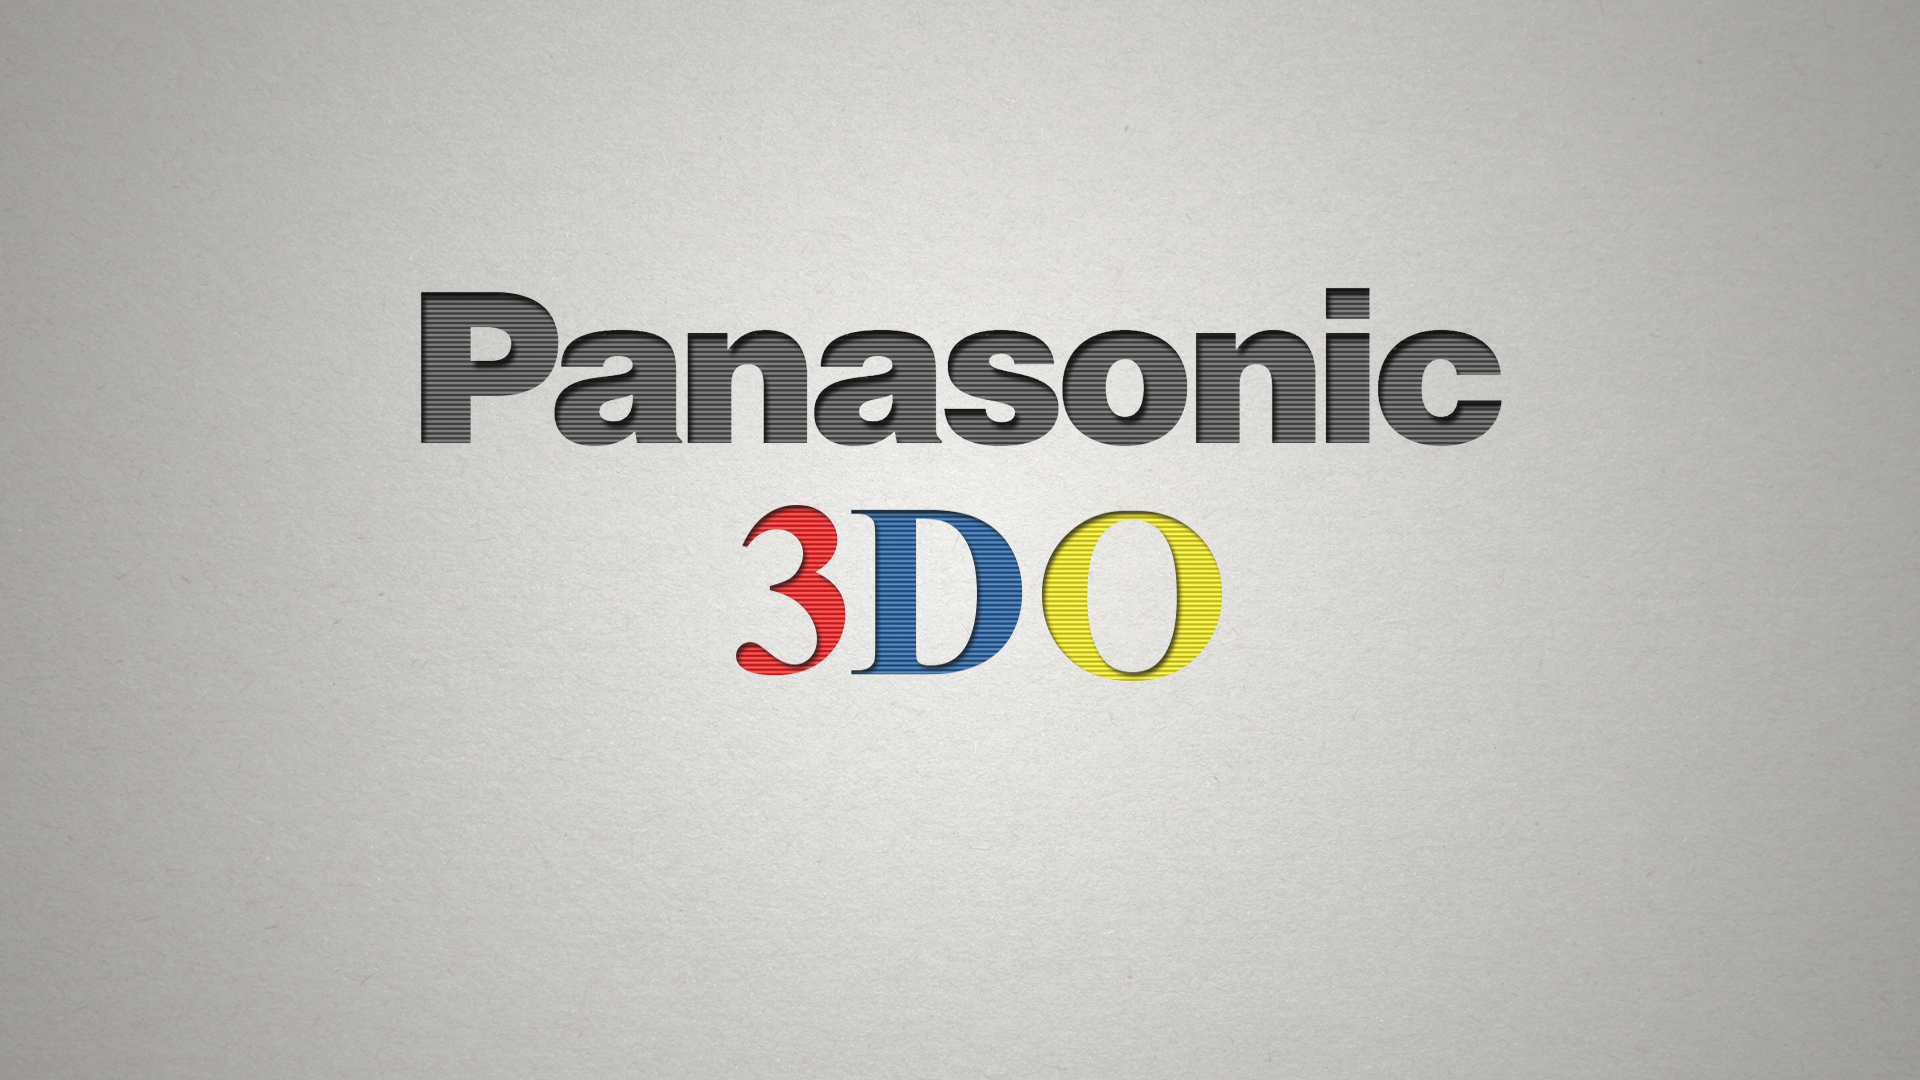 Panasonic 3DO A Sub Gallery By: TorinoGT